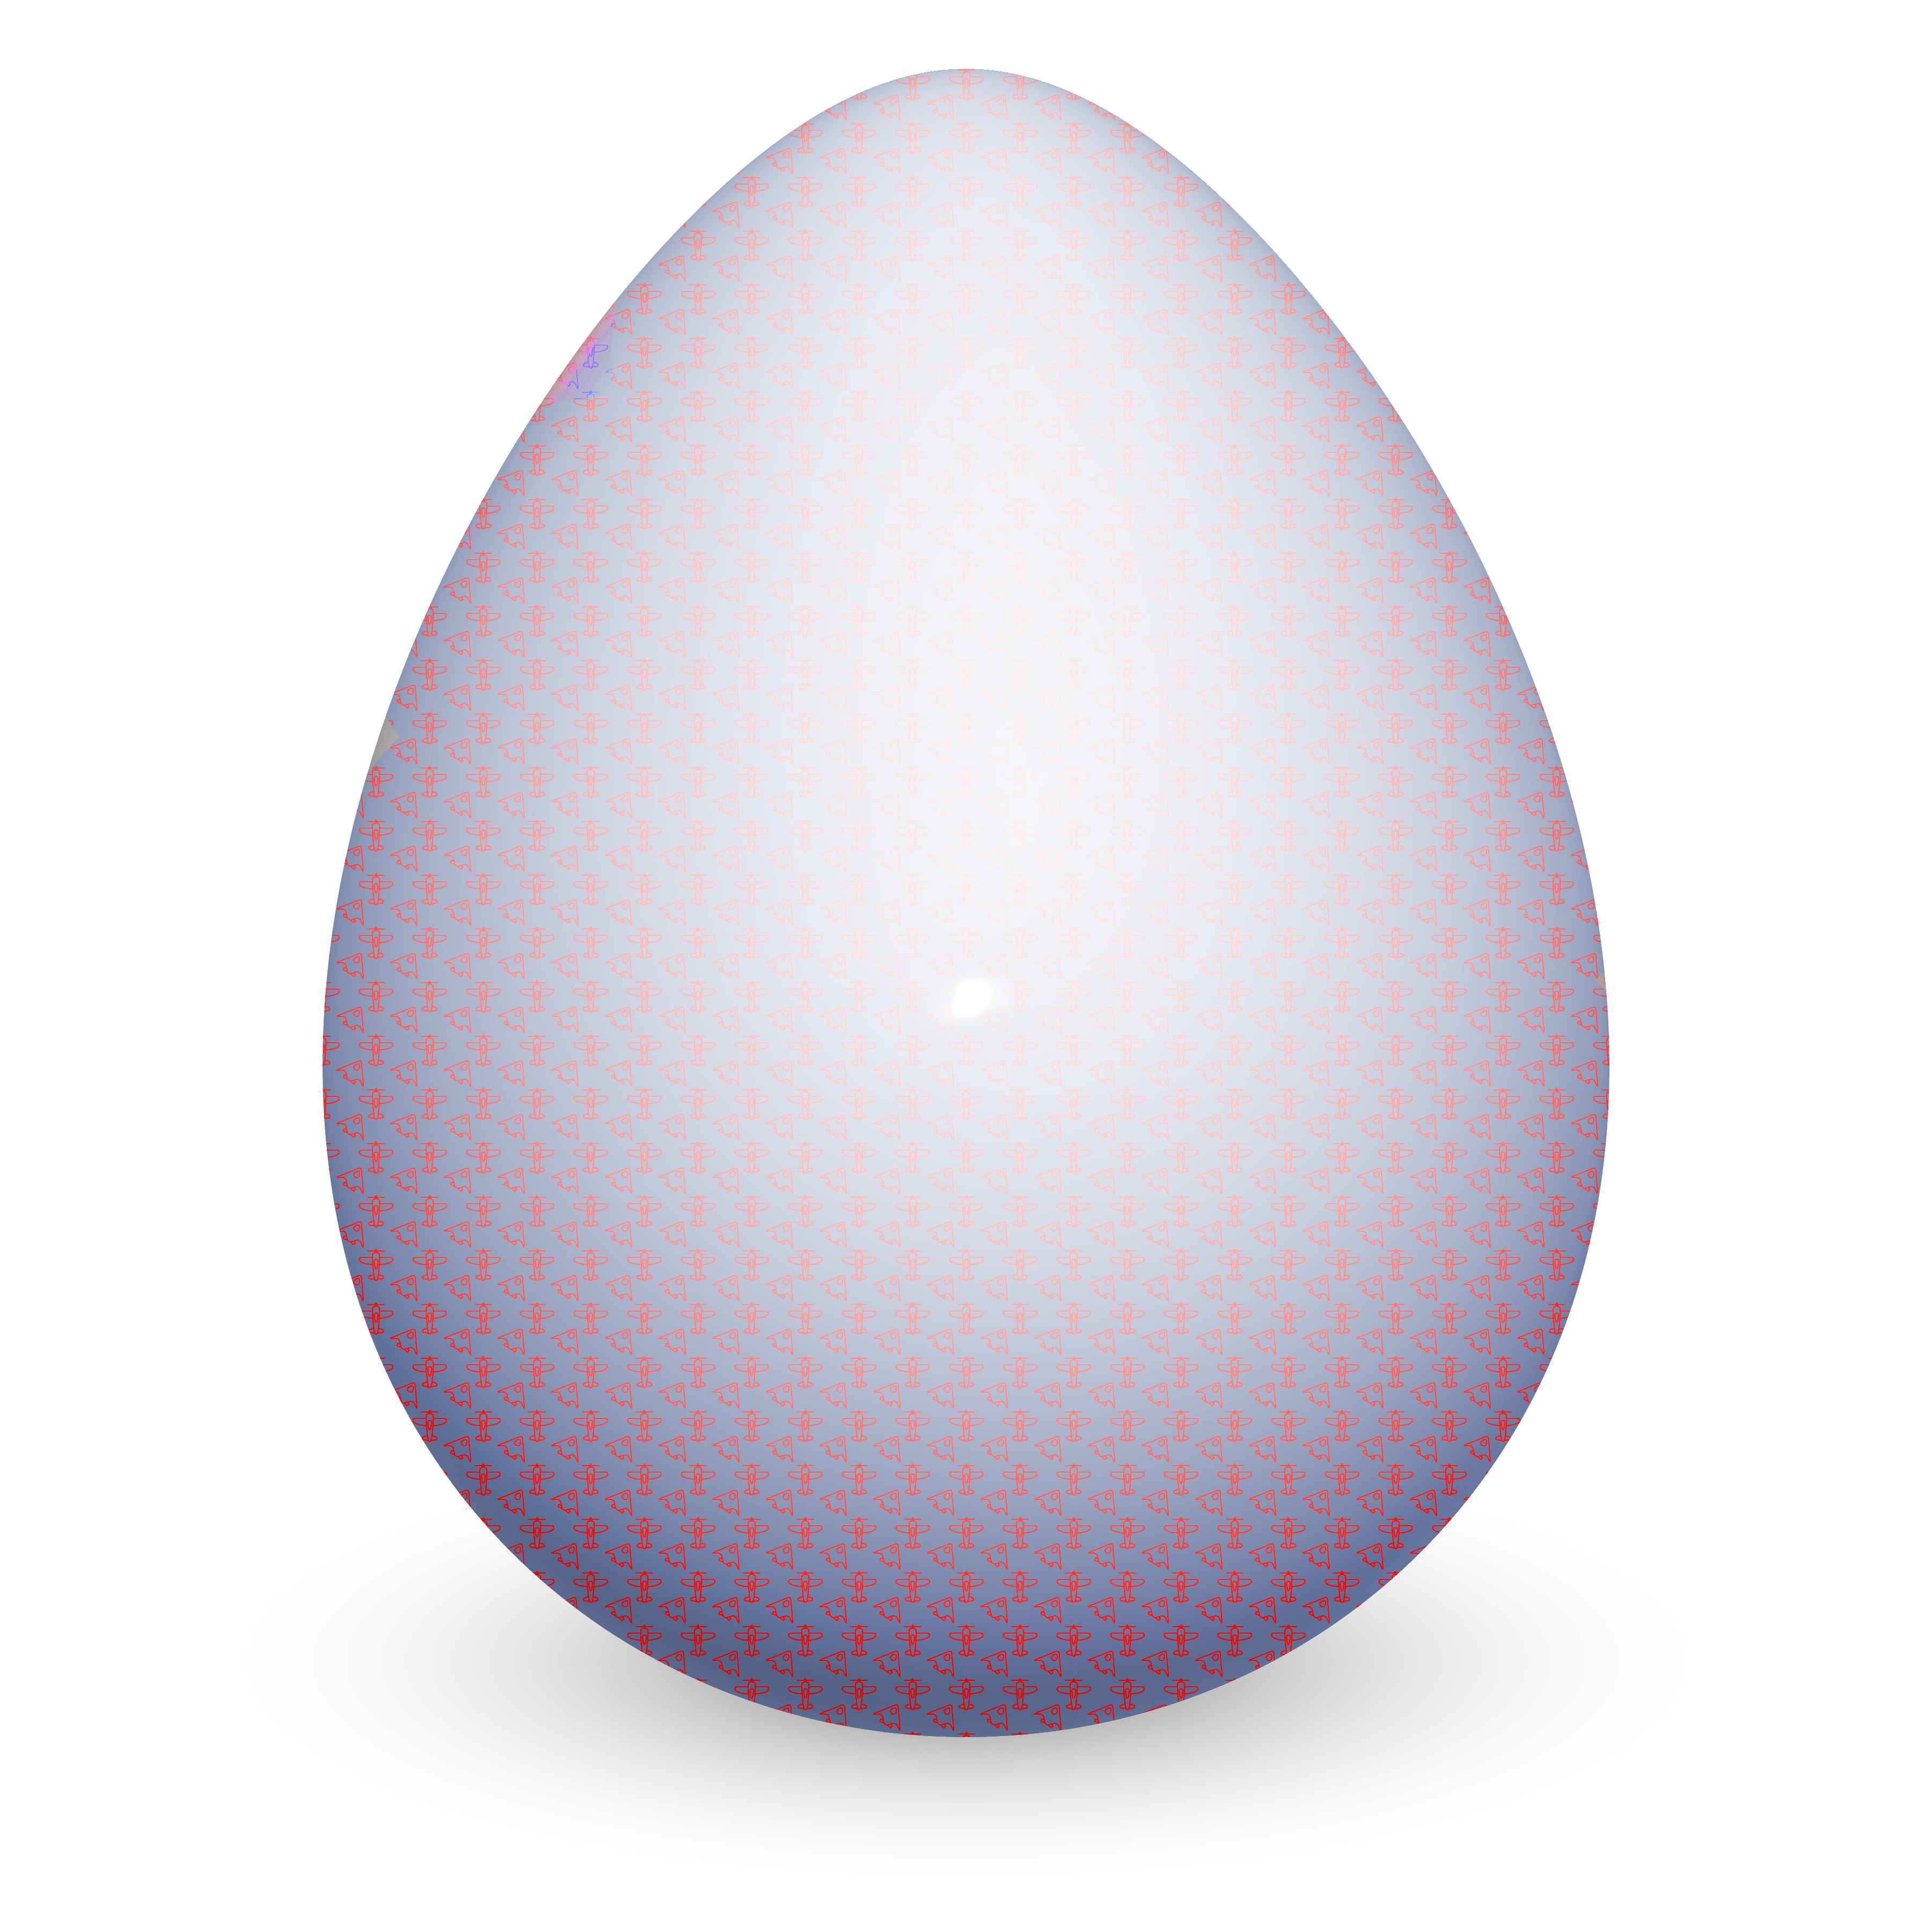 Dragon and images with. Eggs clipart 6 egg